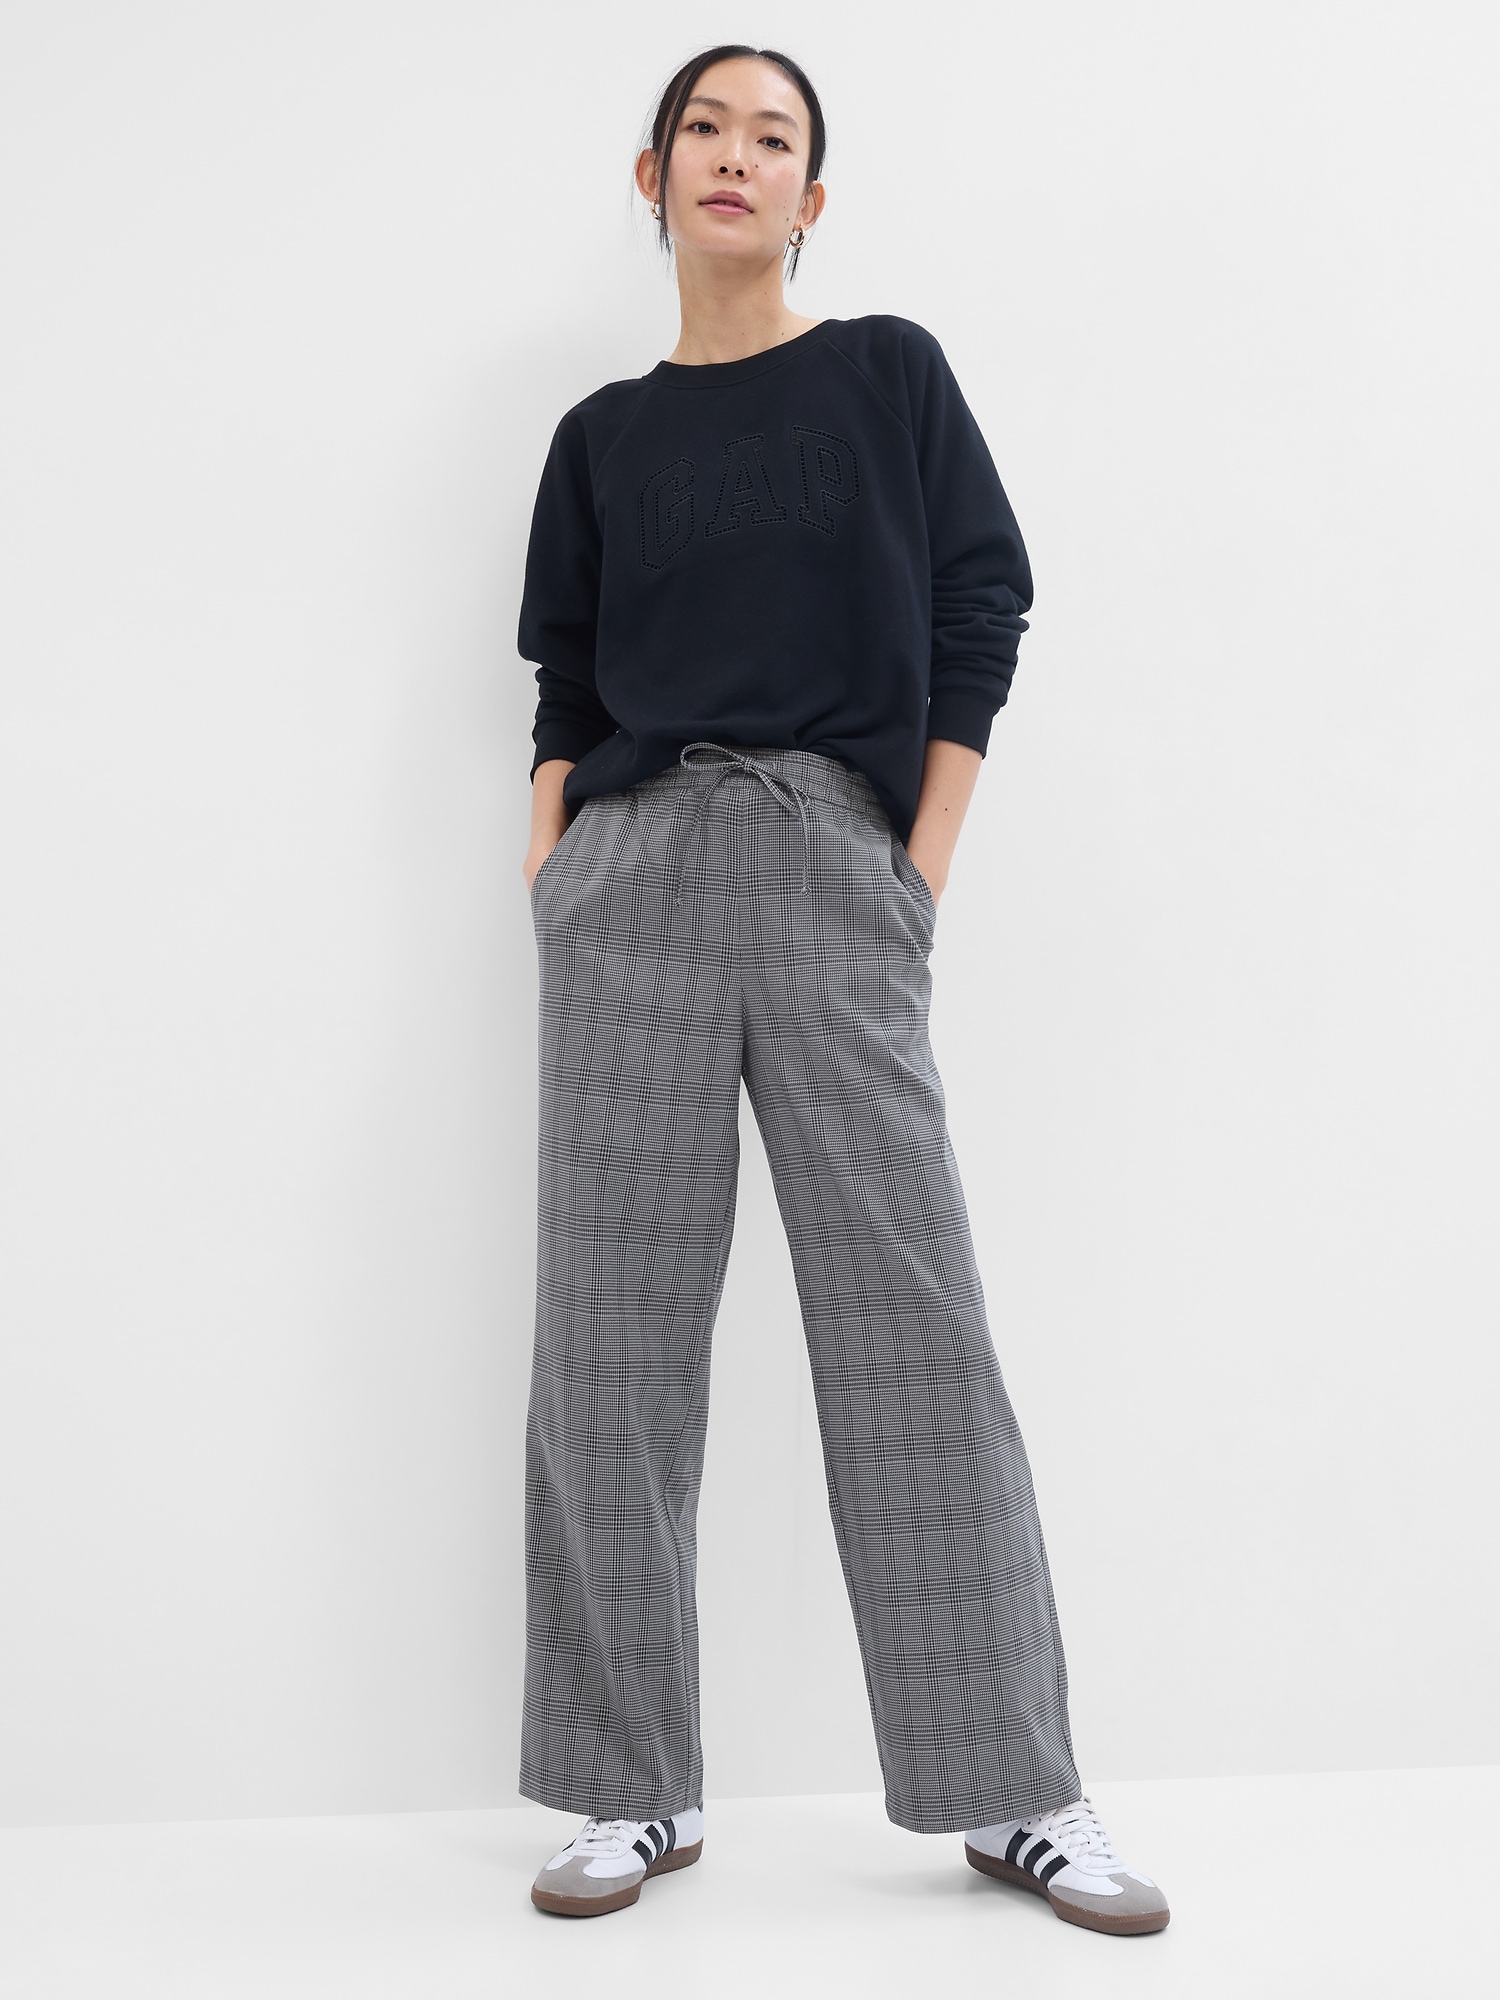 Twill Trousers - Buy Twill Trousers online in India